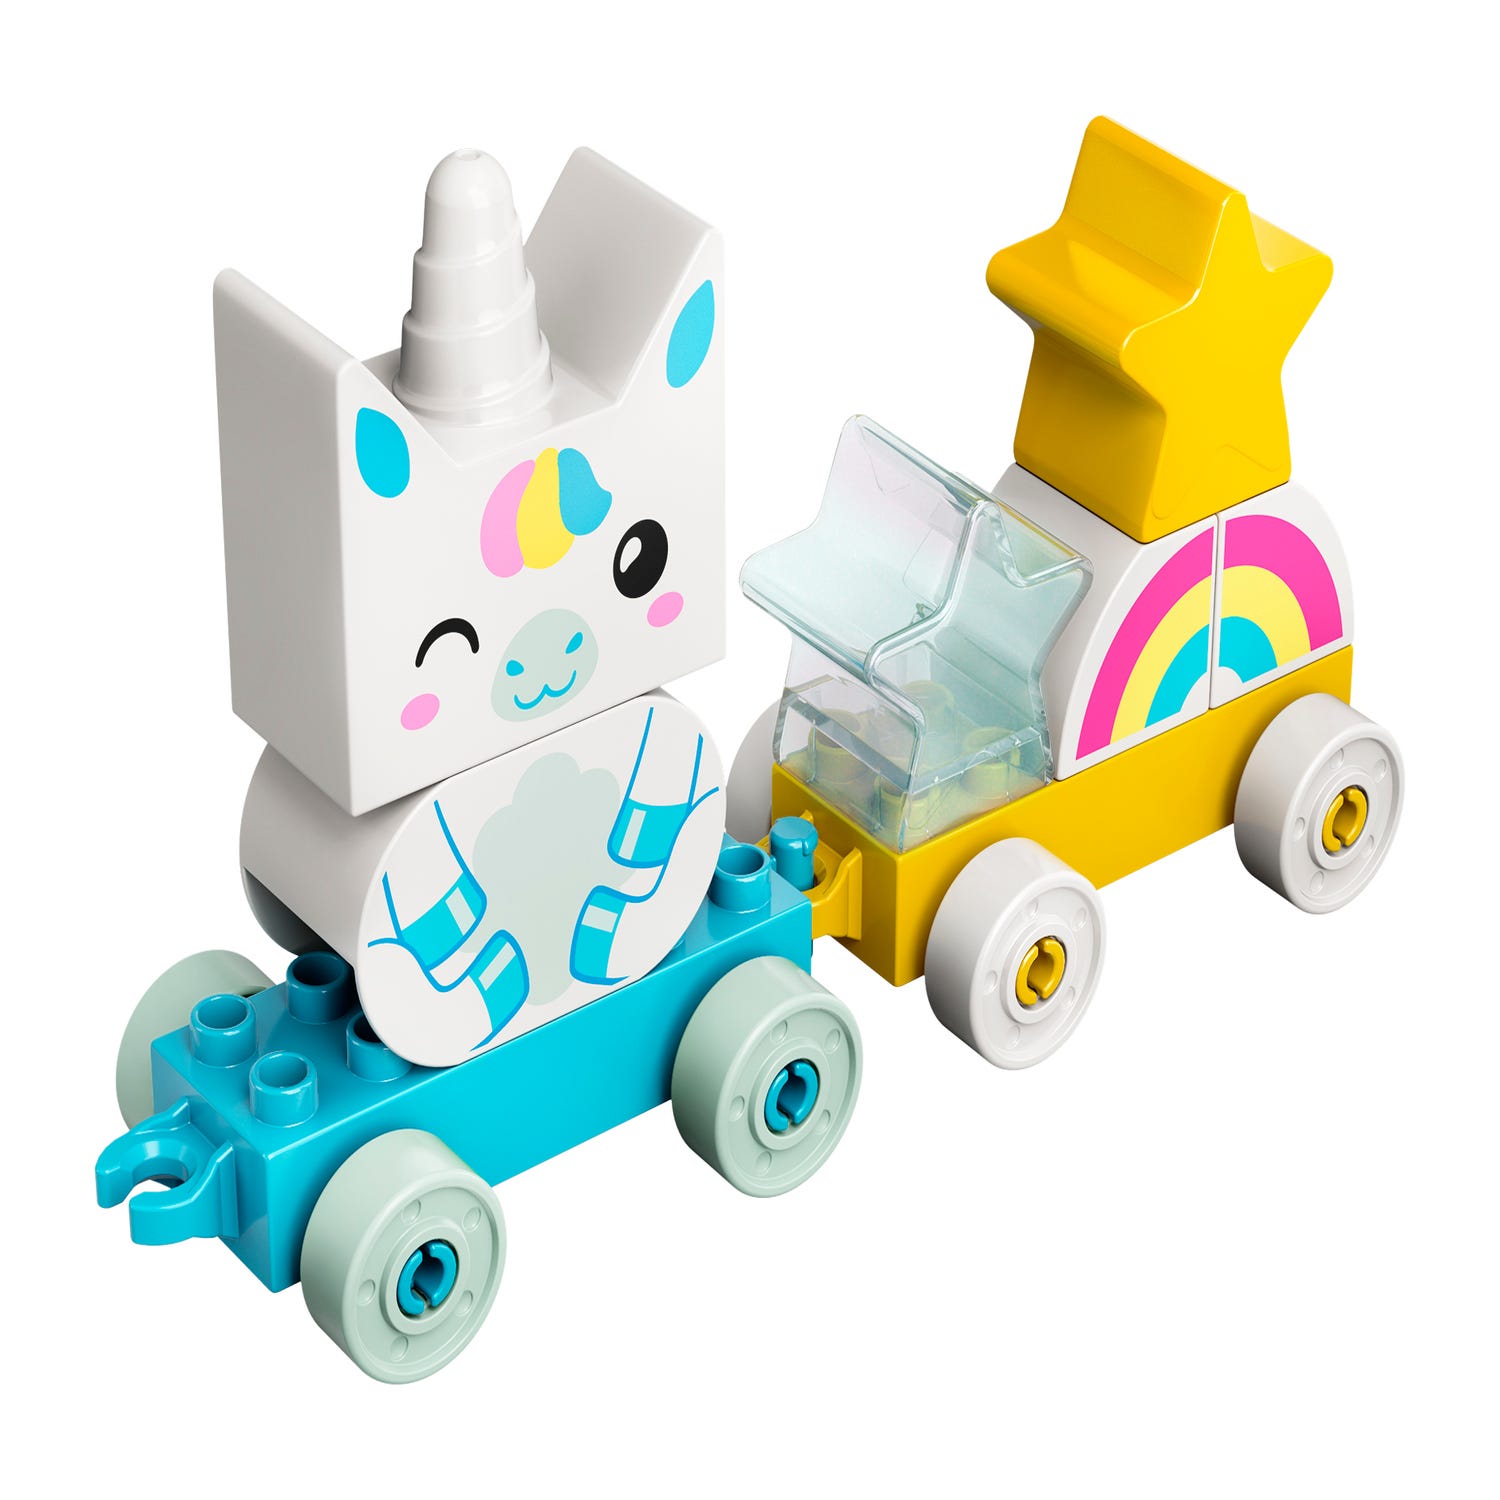 Unicorn 10953 | DUPLO® | LEGO® US at Official online the Shop Buy